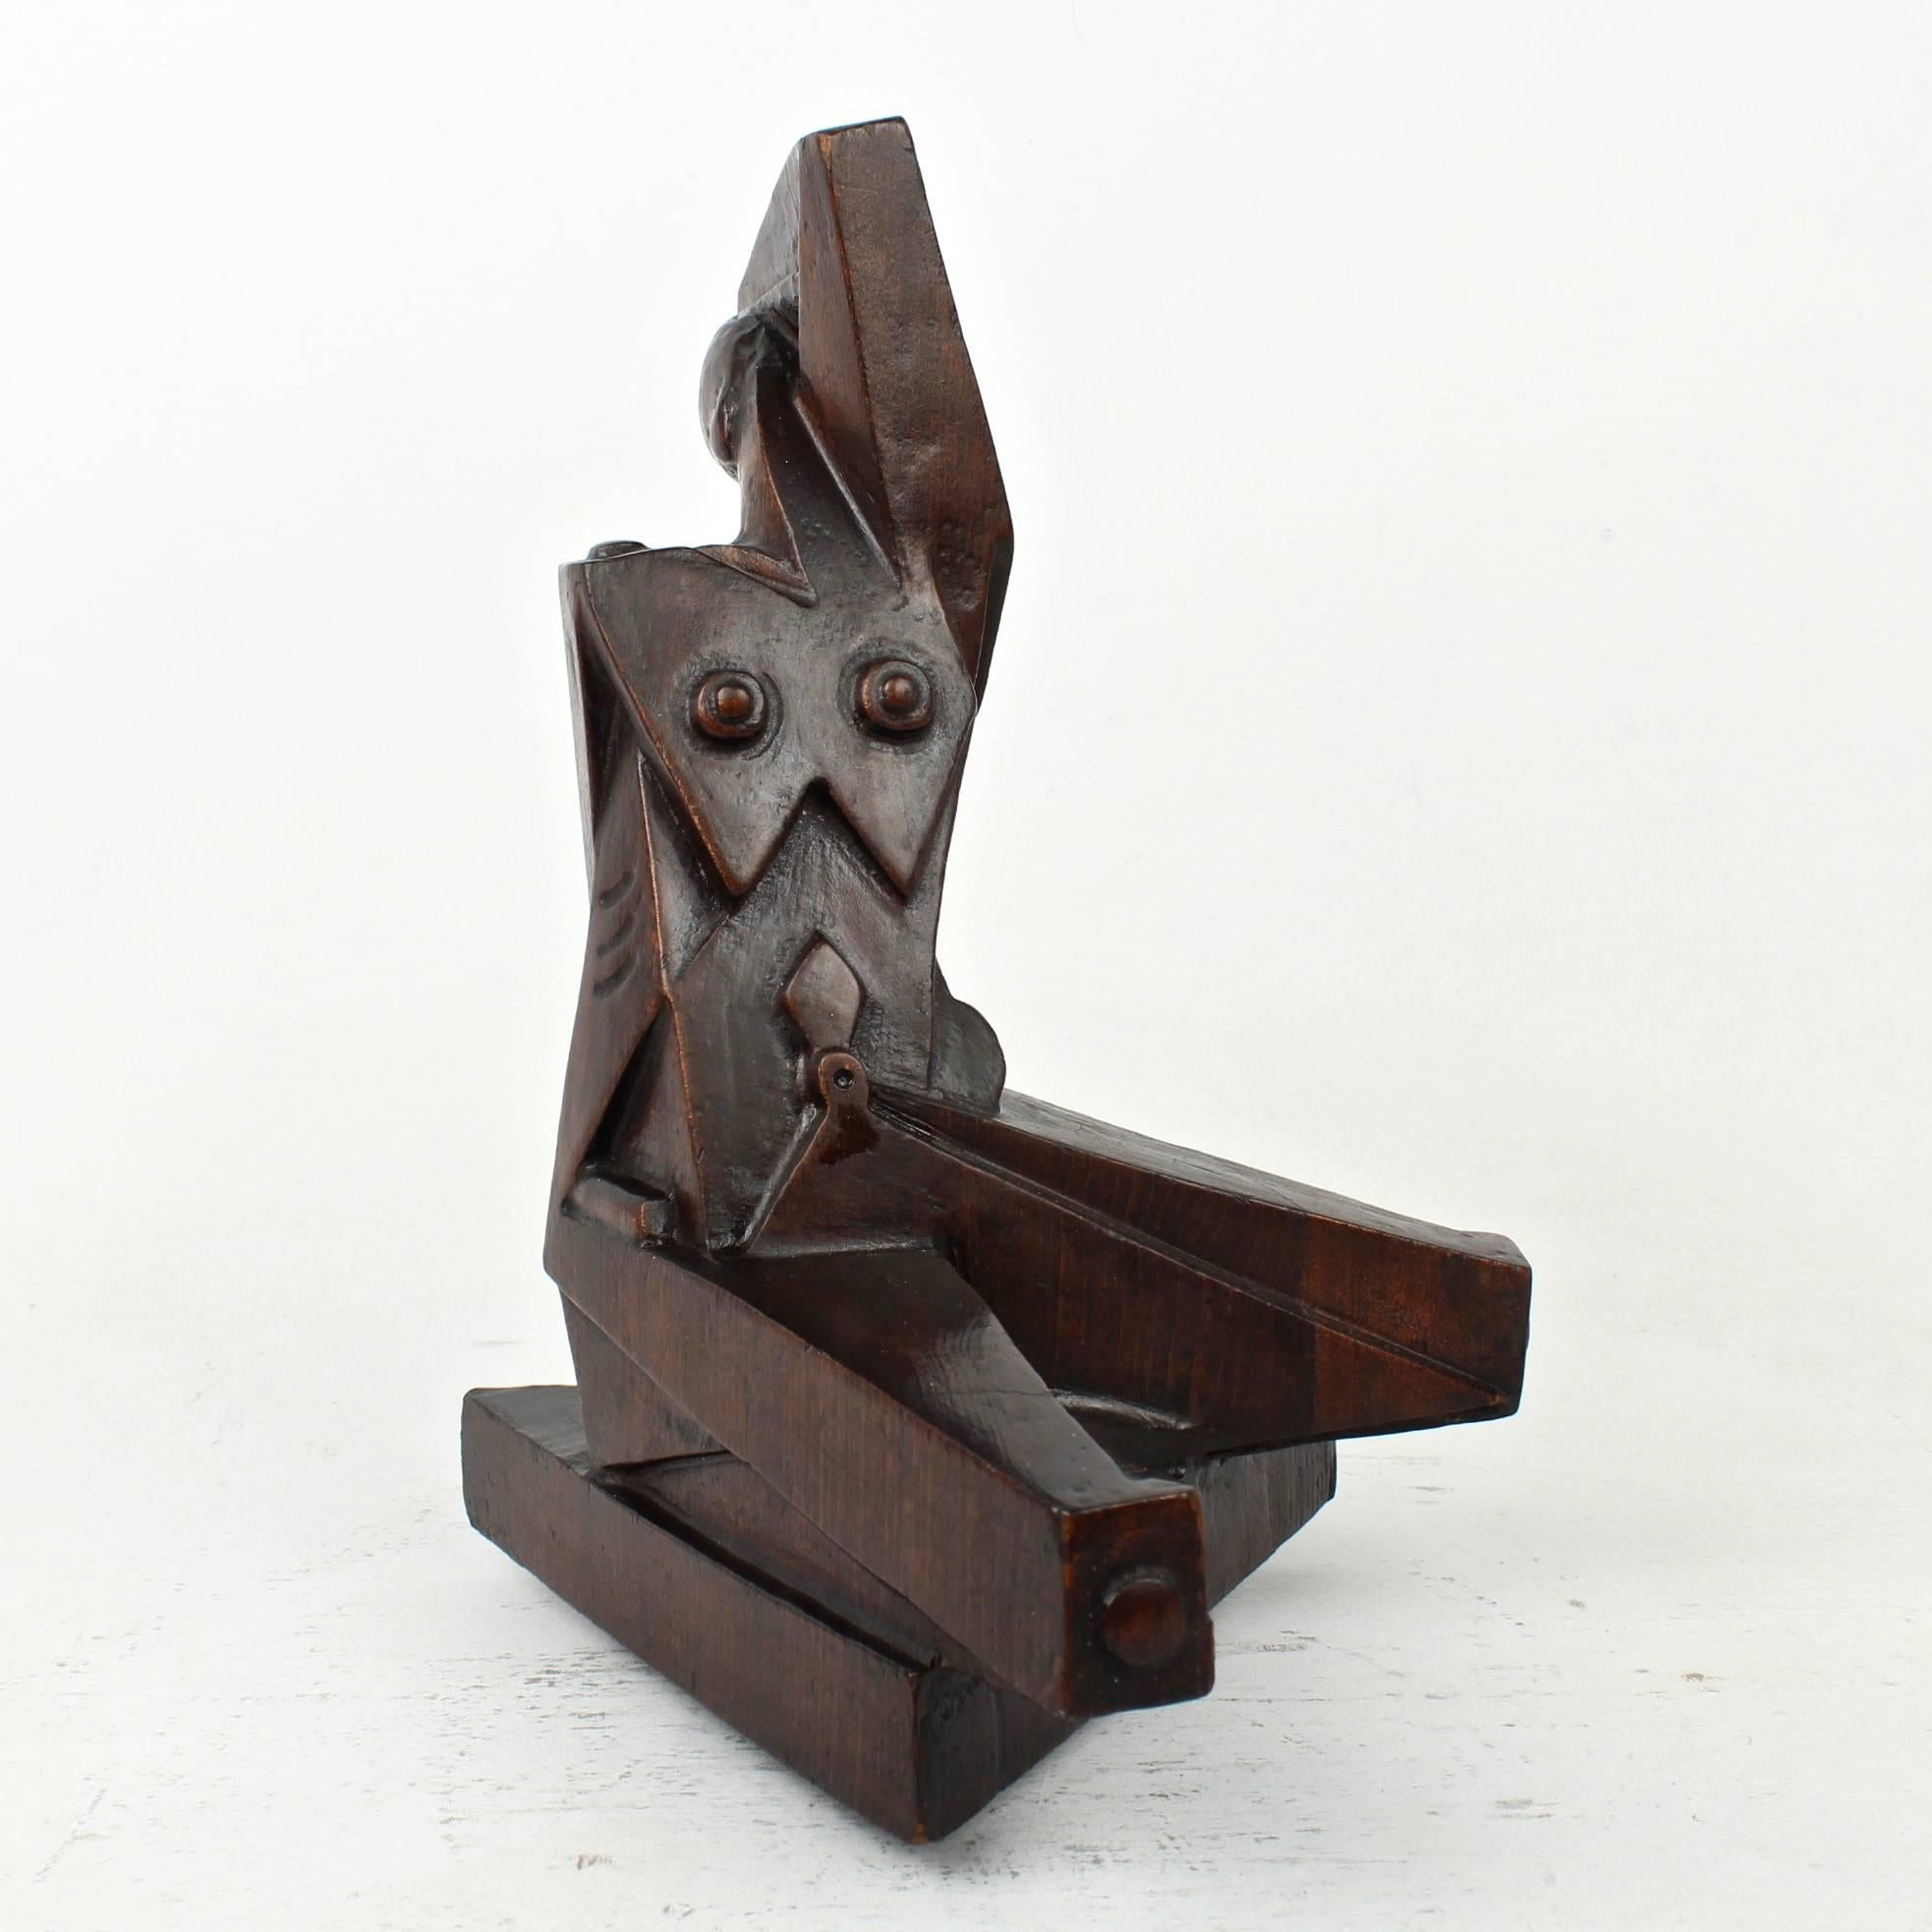 A carved wooden cubist sculpture of a seated nude woman by Boris Blai (1893-1985). 

This carving likely dates to the 1920s-1930s (during Blai's time in Philadelphia).

Most likely constructed of sections of laminated basswood stained with a